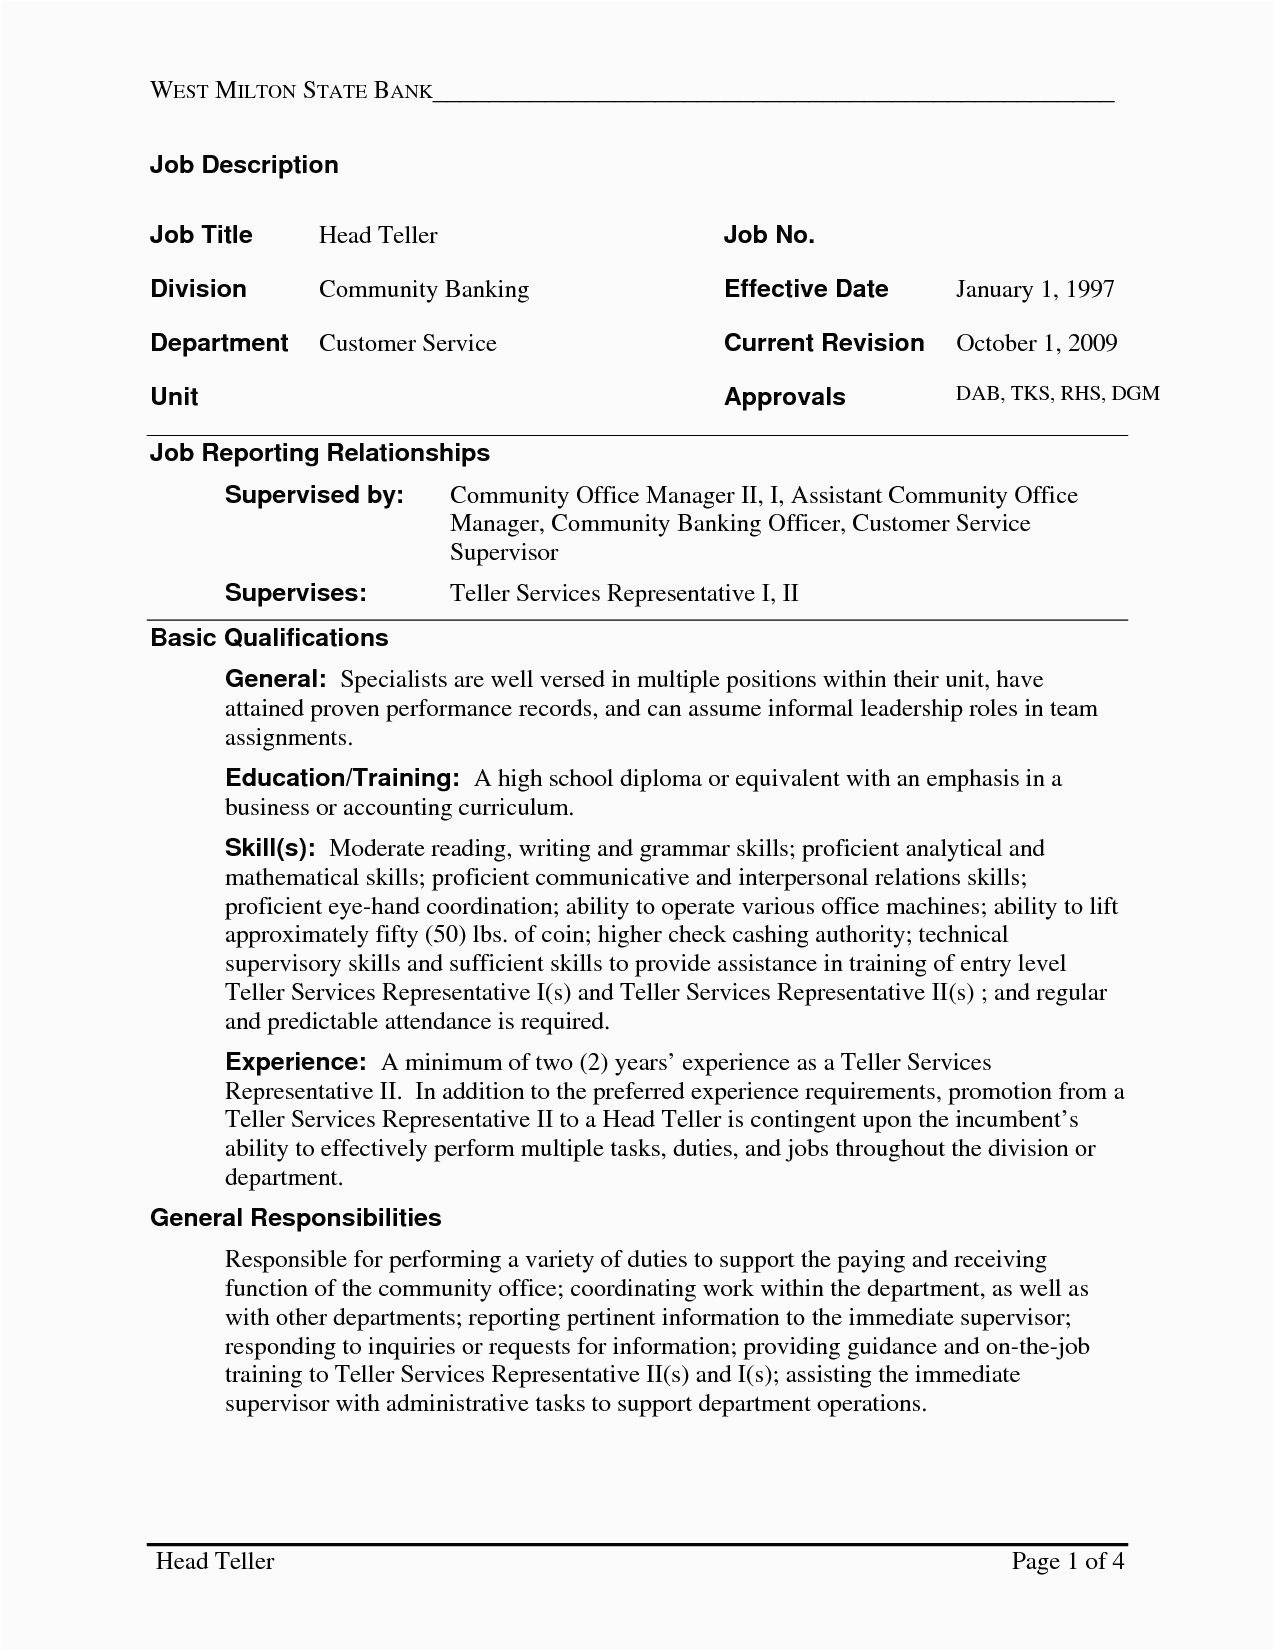 Sample Resume for Bank Teller Position with No Experience Pin by Calendar 2019 2020 On Latest Resume